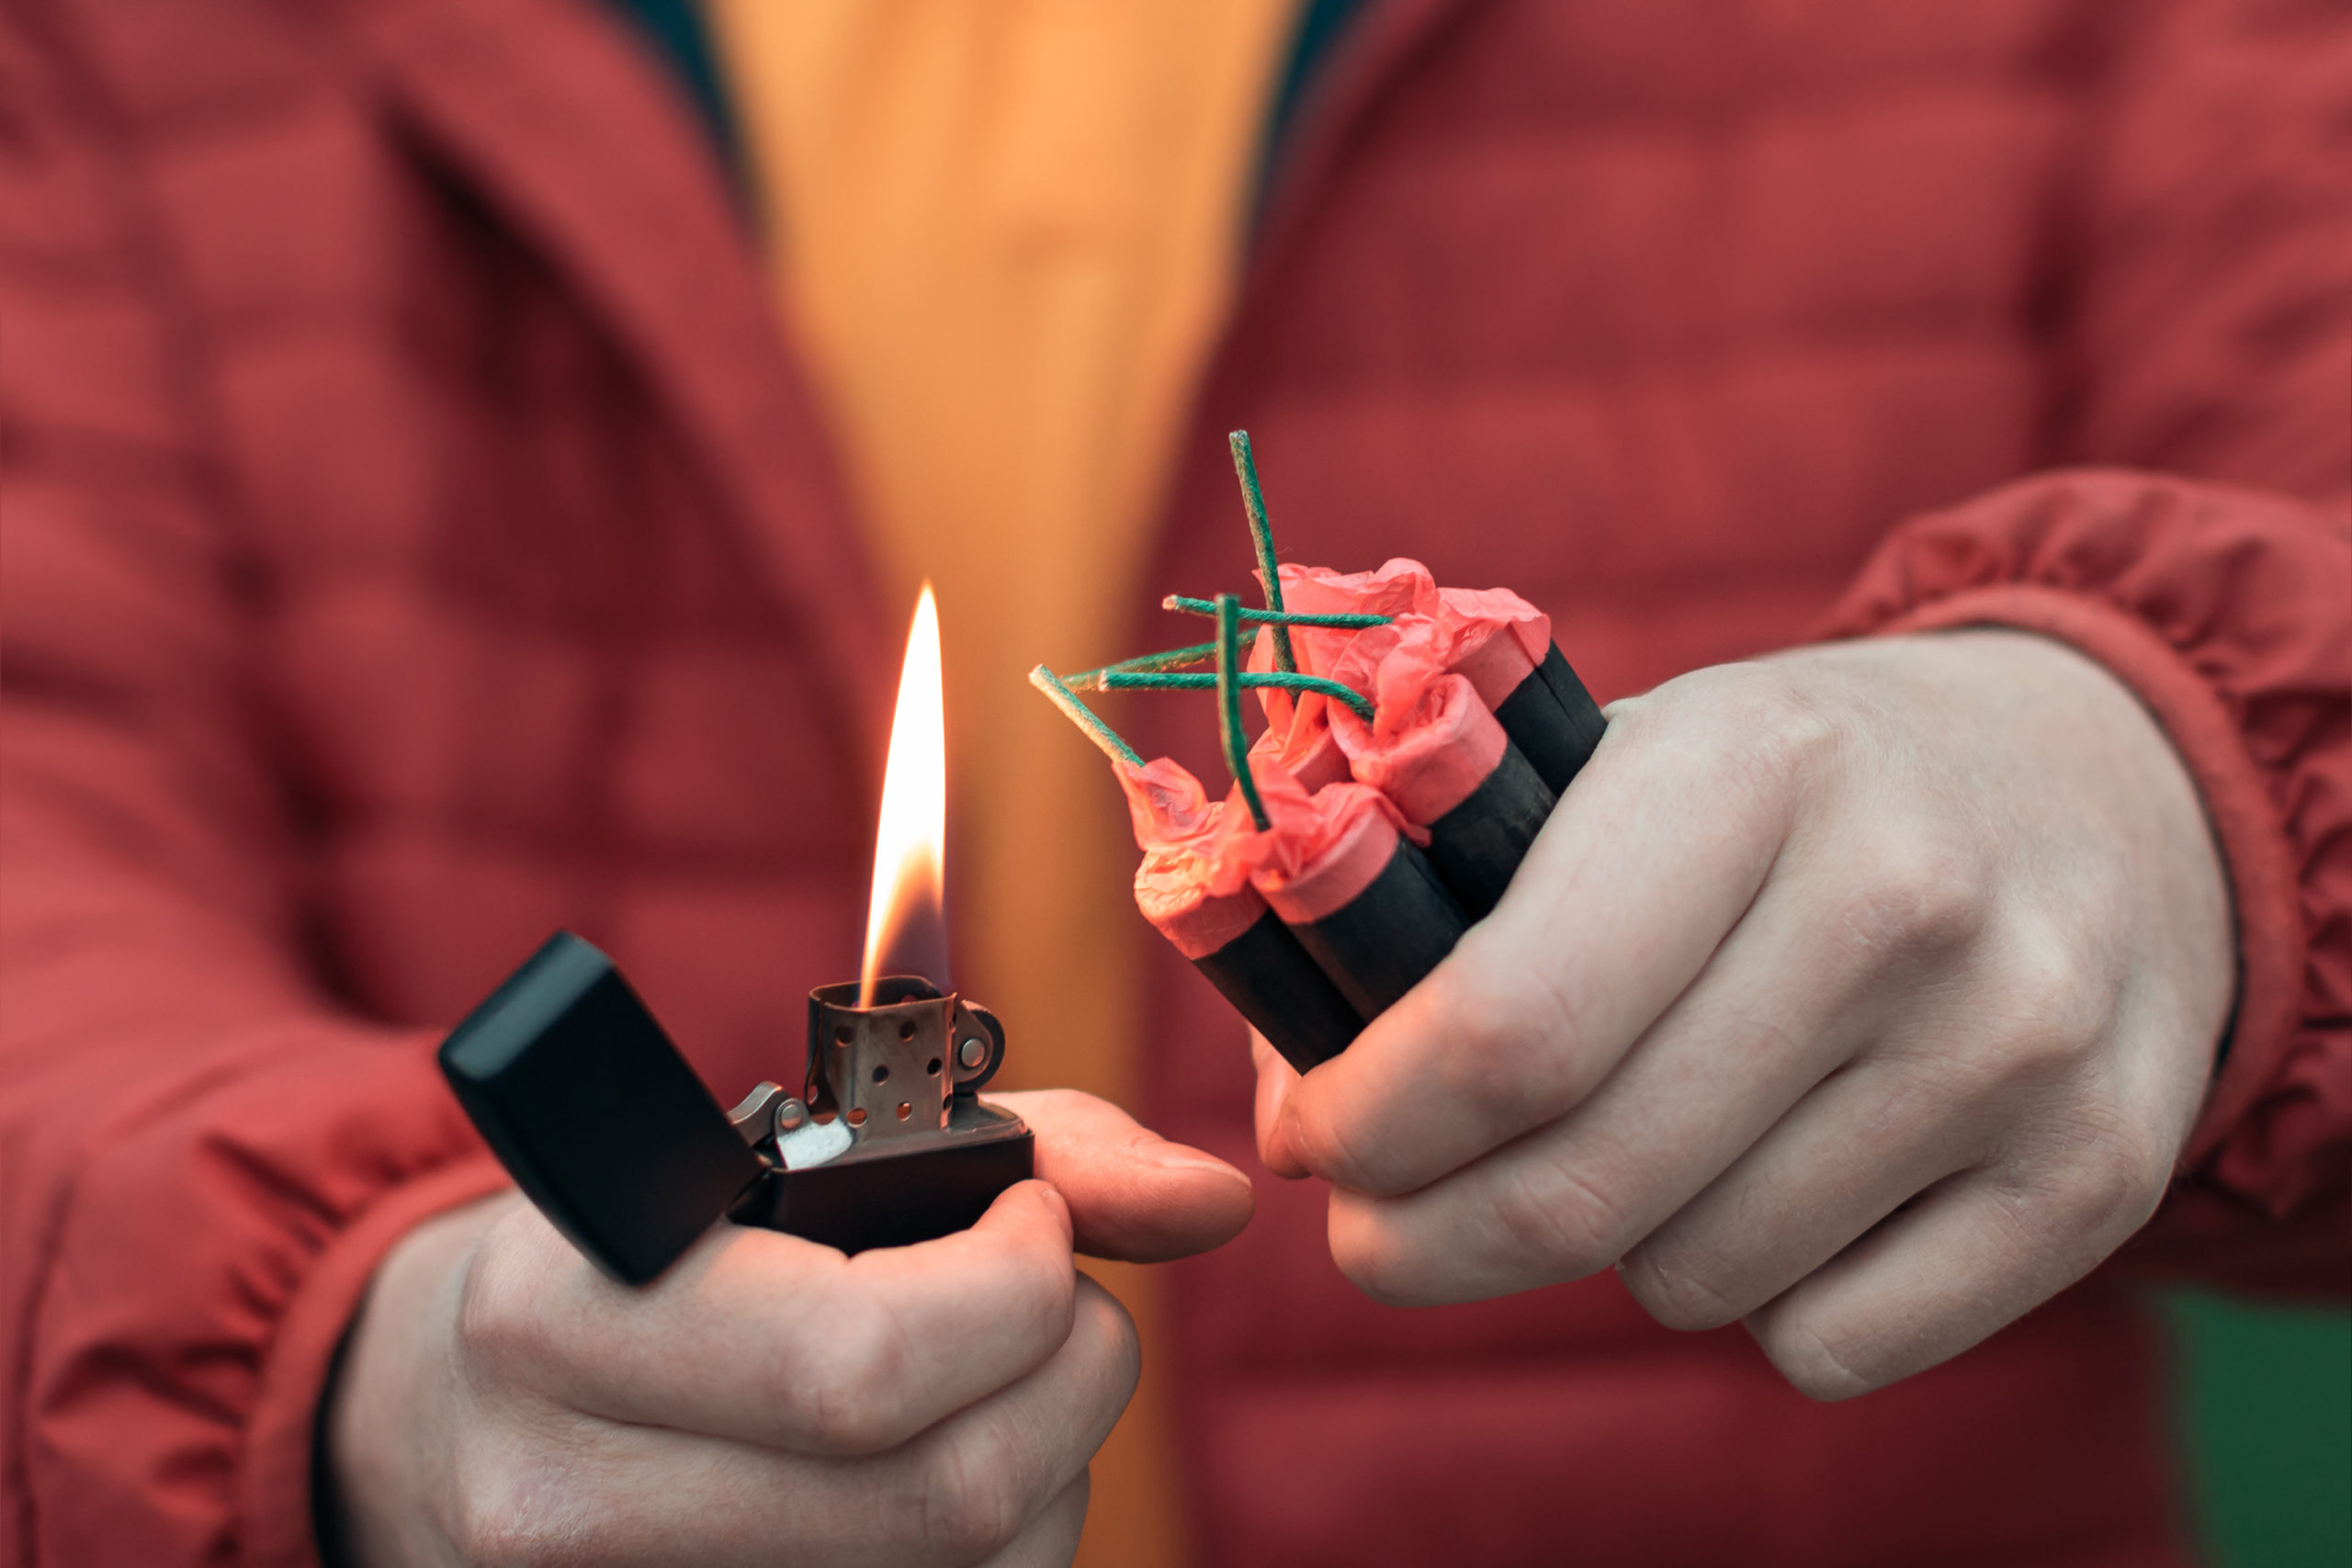 Use a grill lighter instead of a cigarette lighter, so your hands are further from the sparks.